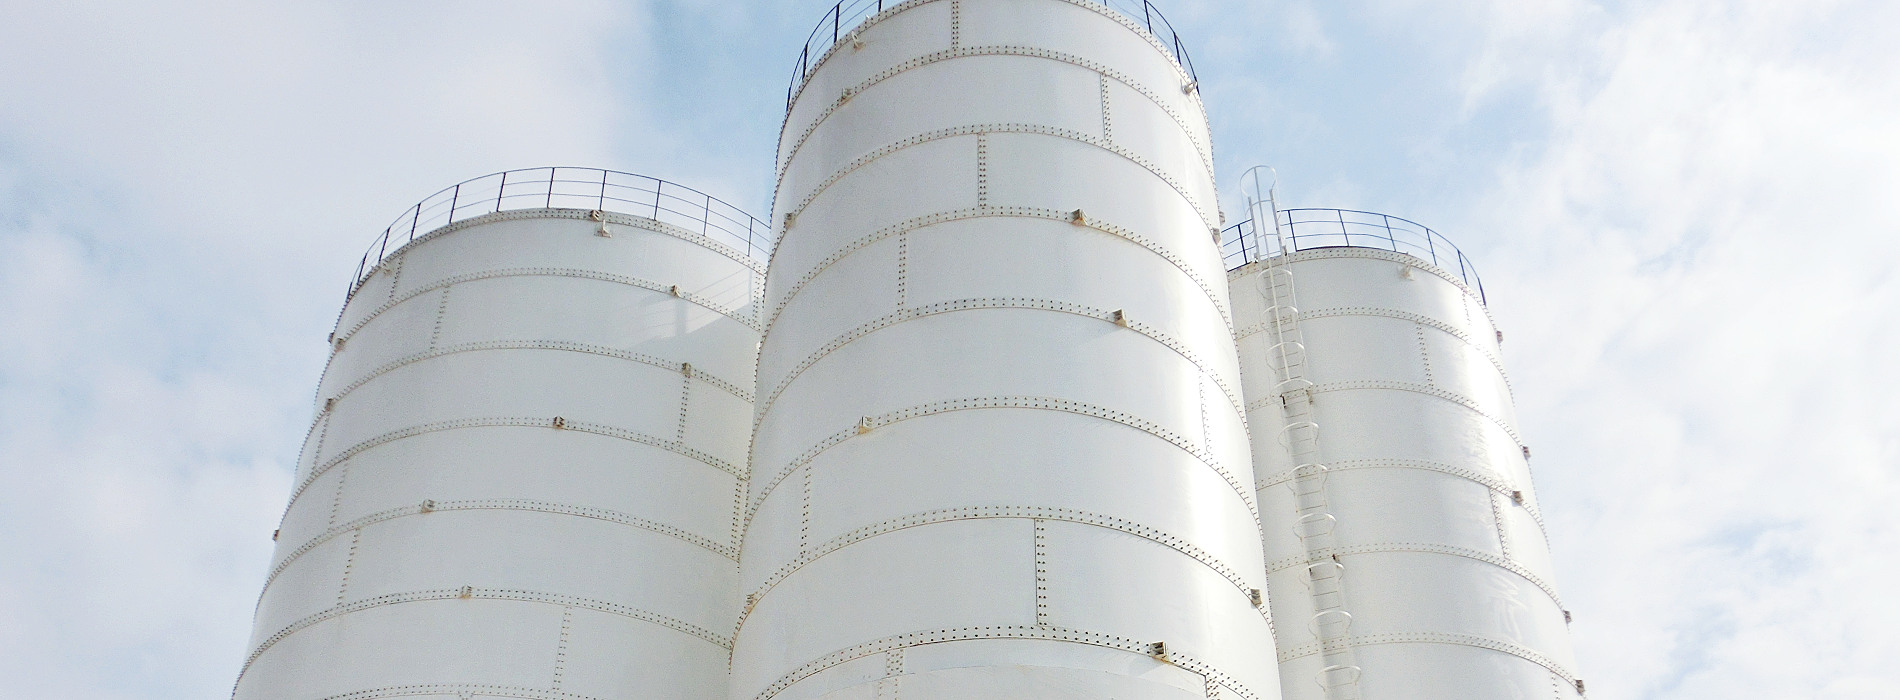 METAL SILO SYSTEMS